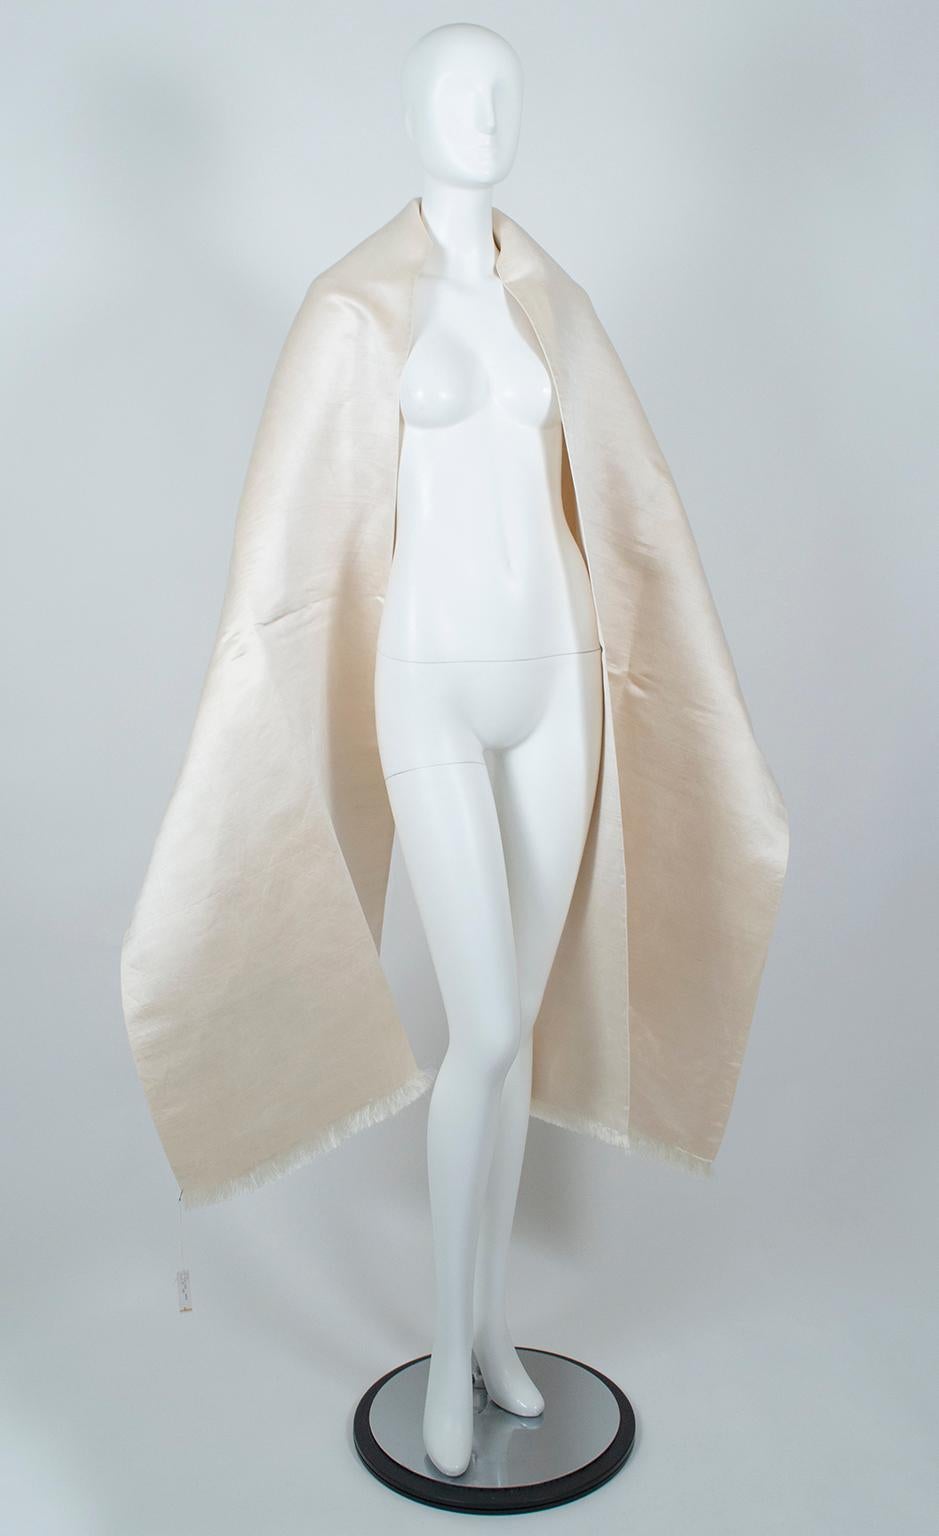 One of Jacqueline Kennedy Onassis’s favorite designers, Gustave Tassell was known for his ultra-simple, yet powerfully classic looks.  To wit: this piece is one of his scarves, but its massive size (9 feet!) and opulent fabric provide endless